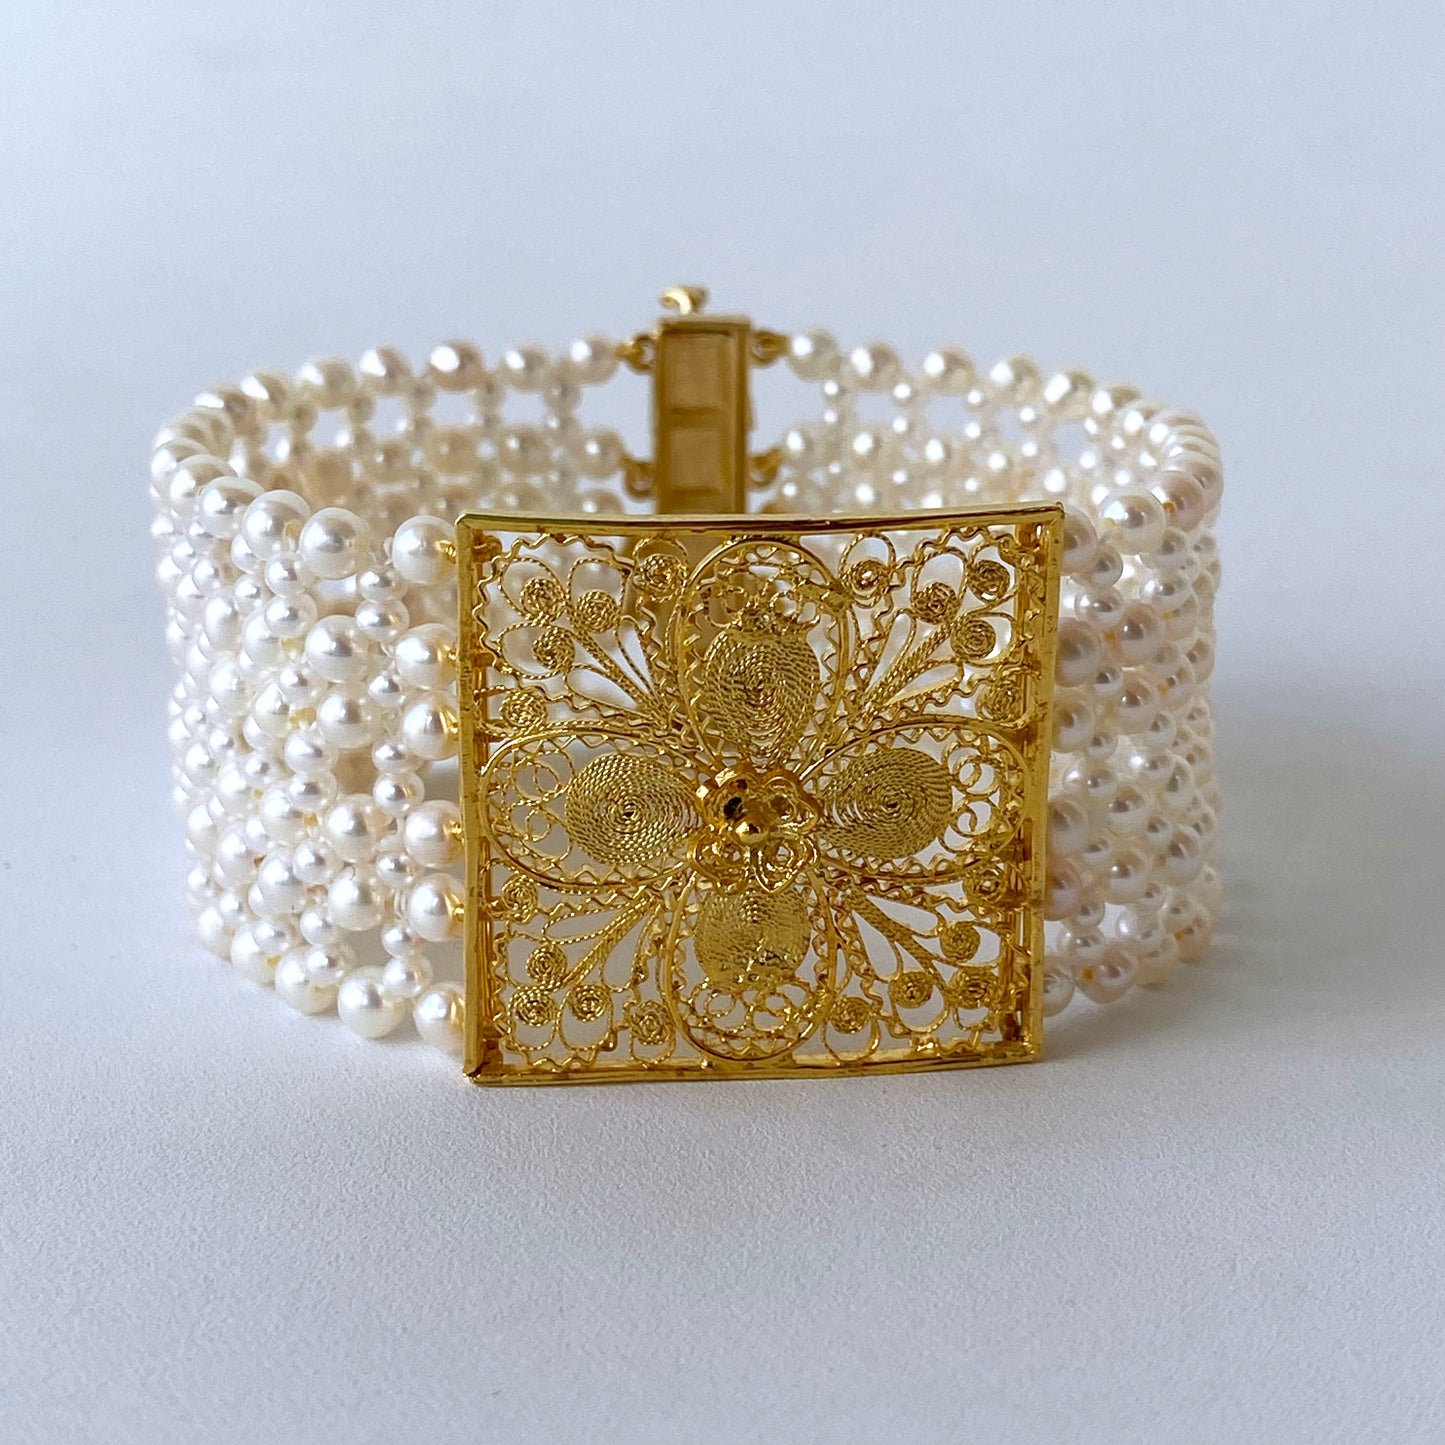 Woven Pearl Bracelet with 18k Yellow Gold Floral Centerpiece & Clasp